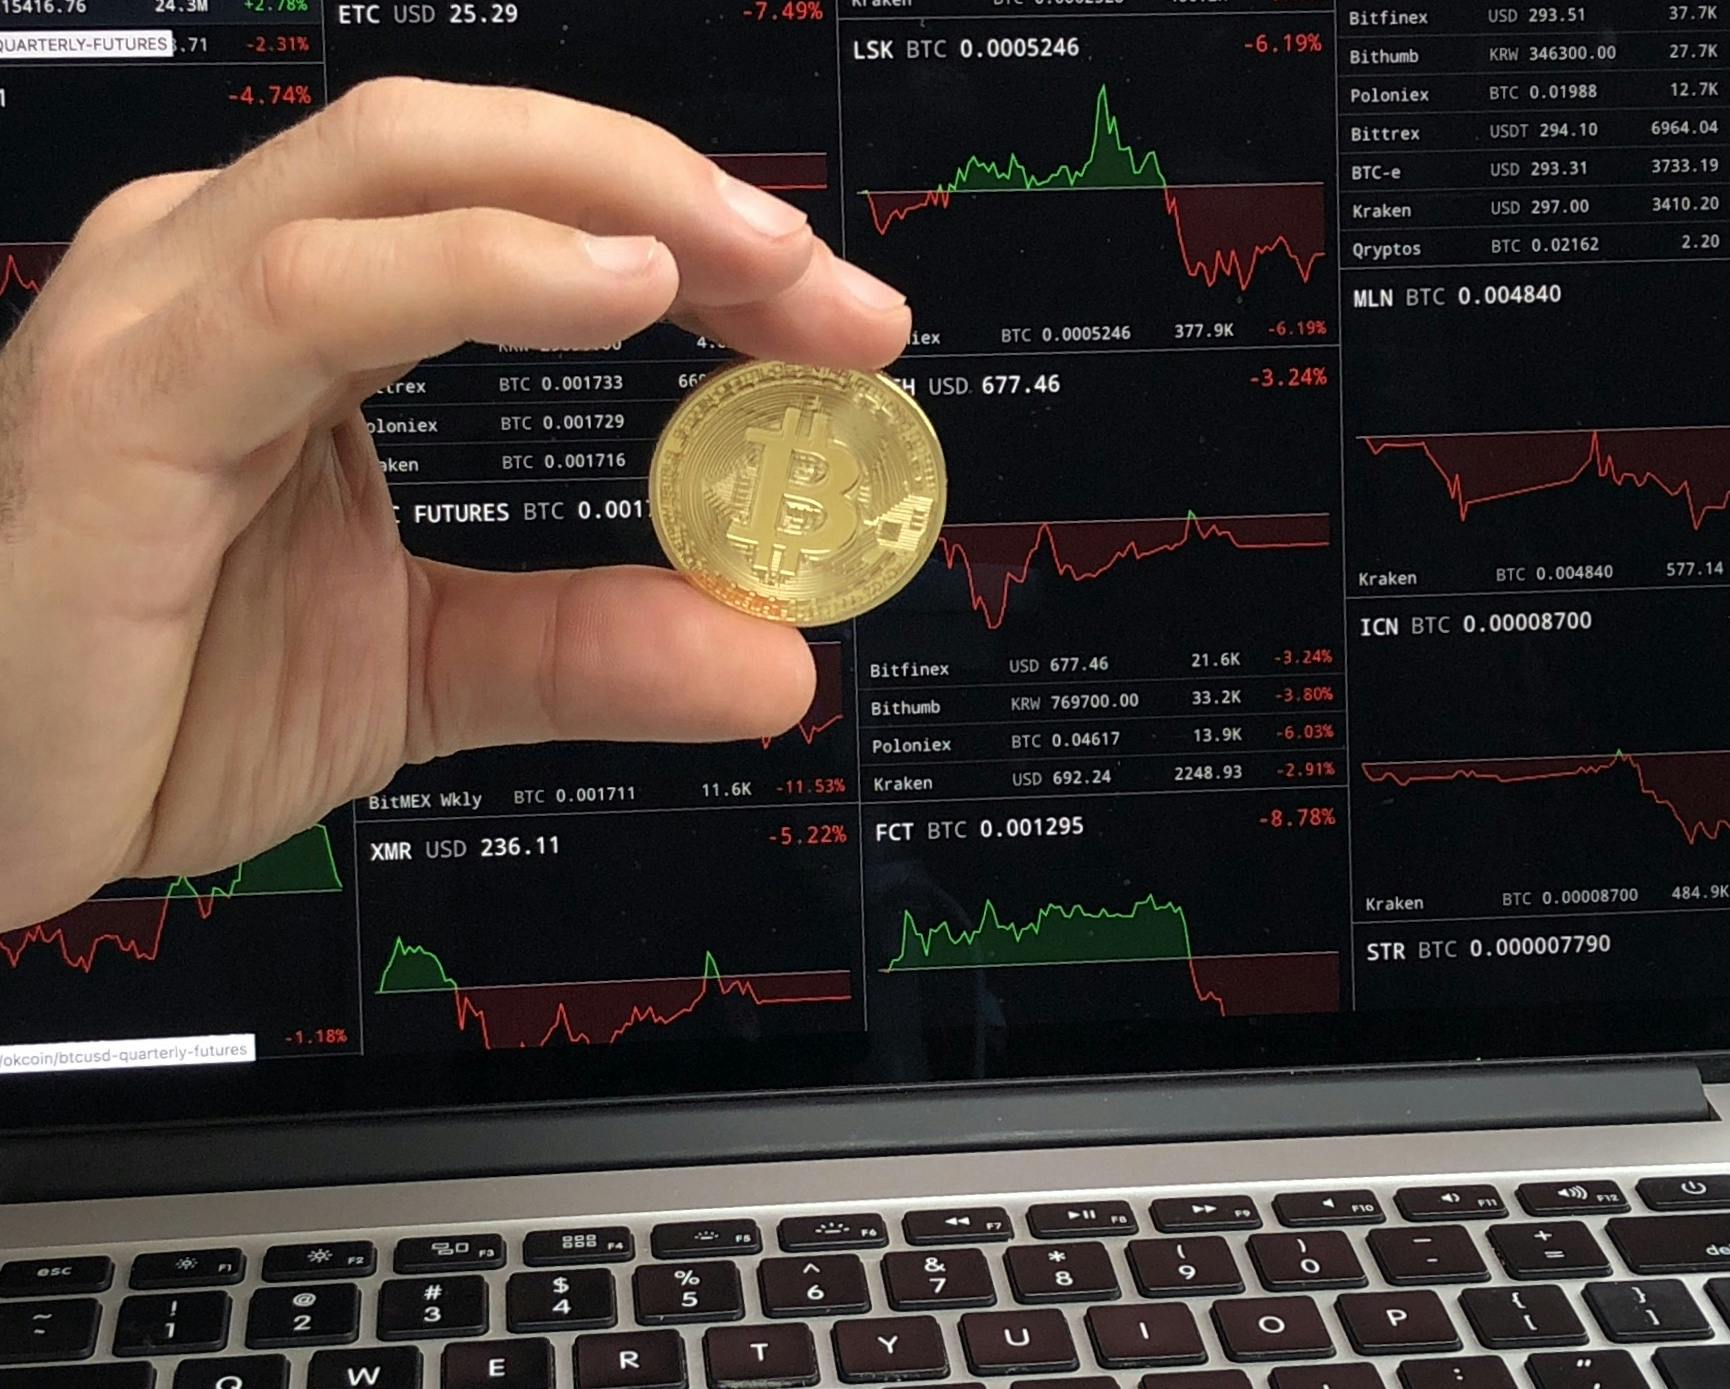 Free stock photo of Hand holding cryptocurrency